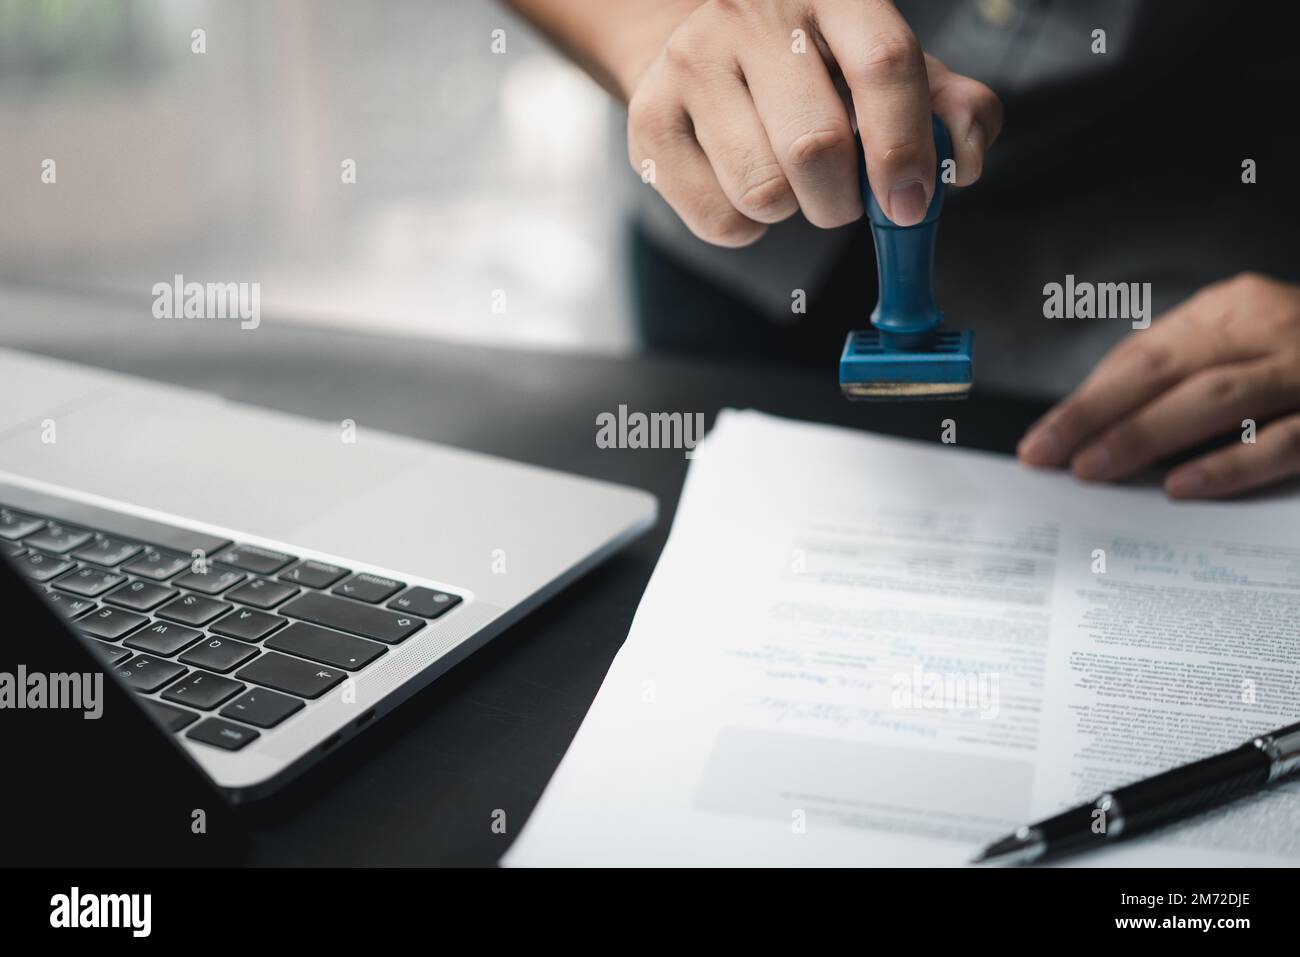 Man stamping approval of work finance banking or investment marketing documents on desk. Stock Photo